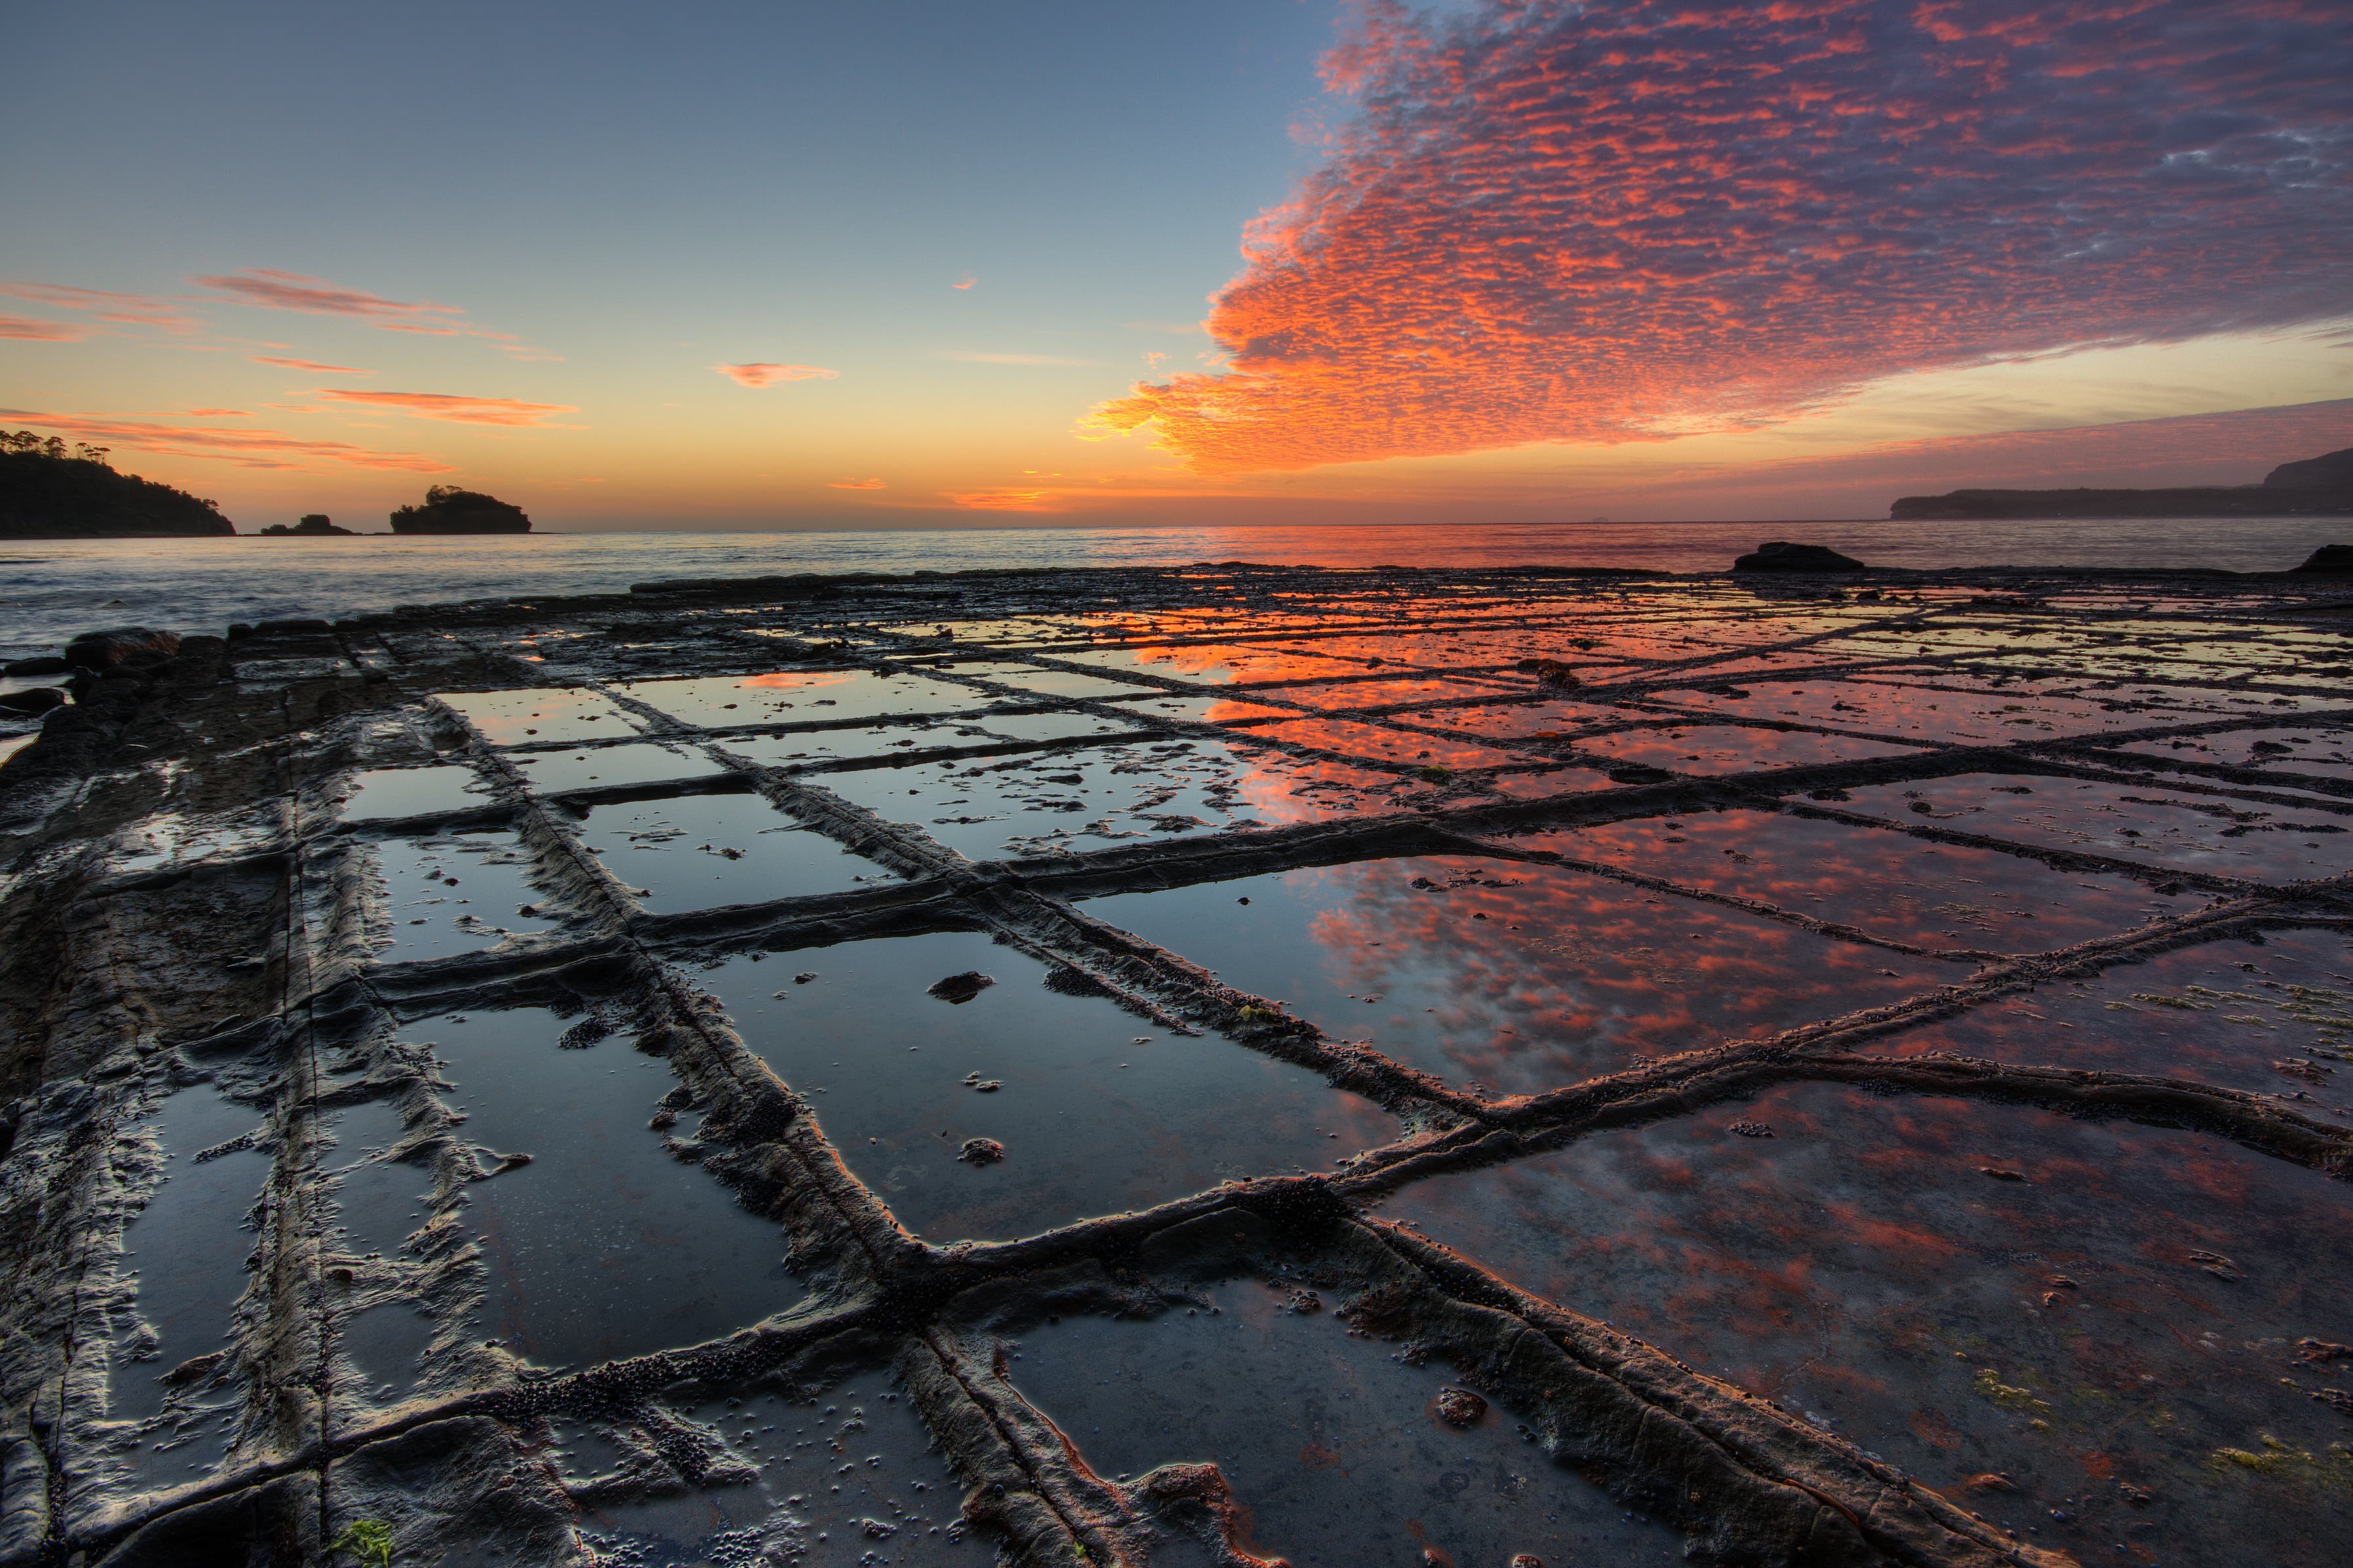 Sunrise, “Tessellated Pavement”, Eaglehawk Neck, Tasman Peninsula, Tasmania, Australia. The „Tesselated Pavement“ is the result of an orthogonal joint pattern in the rock. On the picture it shows the so called “pan formation”, where the rock in the immediate vicinity of the joints is more resistant to erosion than the rock that is more distant to the joints, This is due to alterations of the rock along the joints by hydrothermal (or similar) solutions when the rock was still buried deeply below the surface millions of years ago. When no alterations or alterations that lower the erosional resistivity have taken place in the geological past, the rock along the joints will erode faster than the rock that is more distant to the joints. In that case the so called “loaf formation” of “Tessellated Pavement” will form. by JJ Harrison